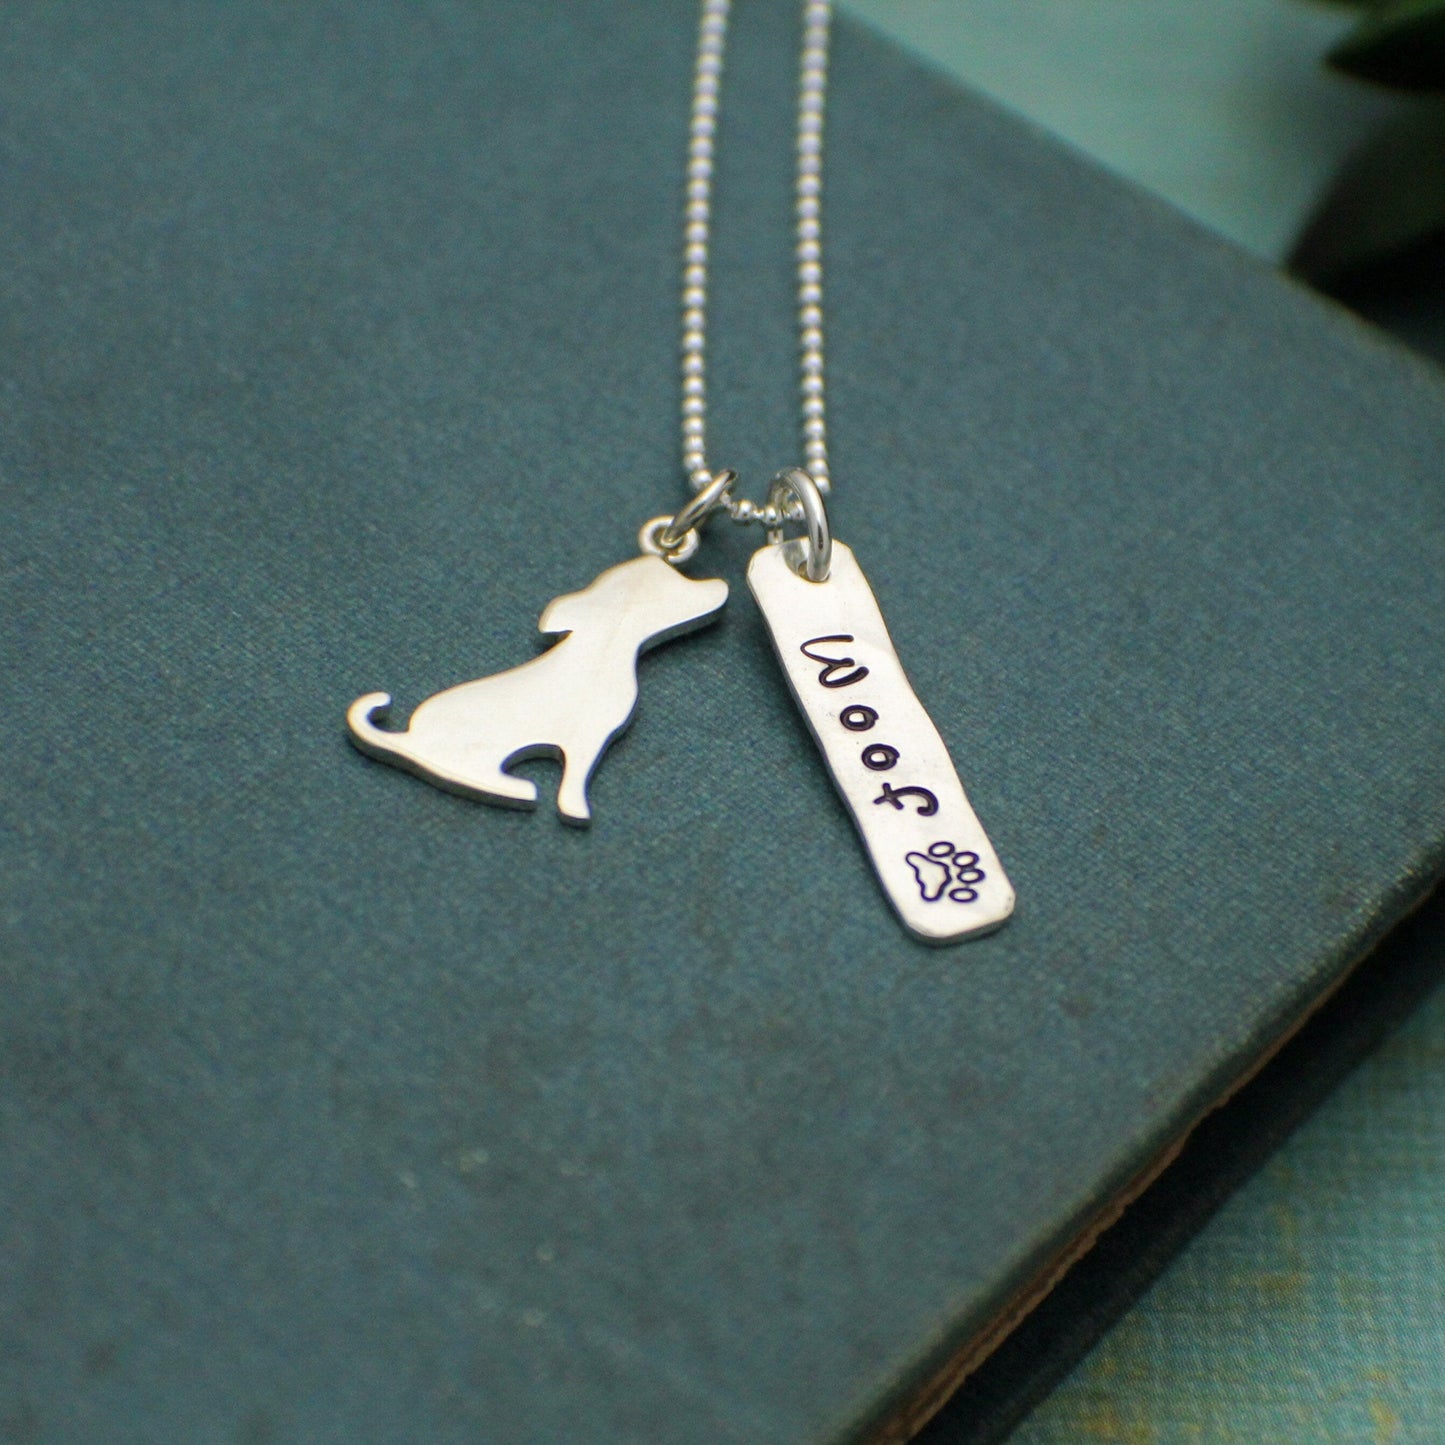 WOOF Necklace, Sterling Silver Dog Necklace, Dog Lover Gift, New Pet Gift, Dog Jewelry, Pup Charm Necklace, Hand Stamped Jewelry, Paw Print